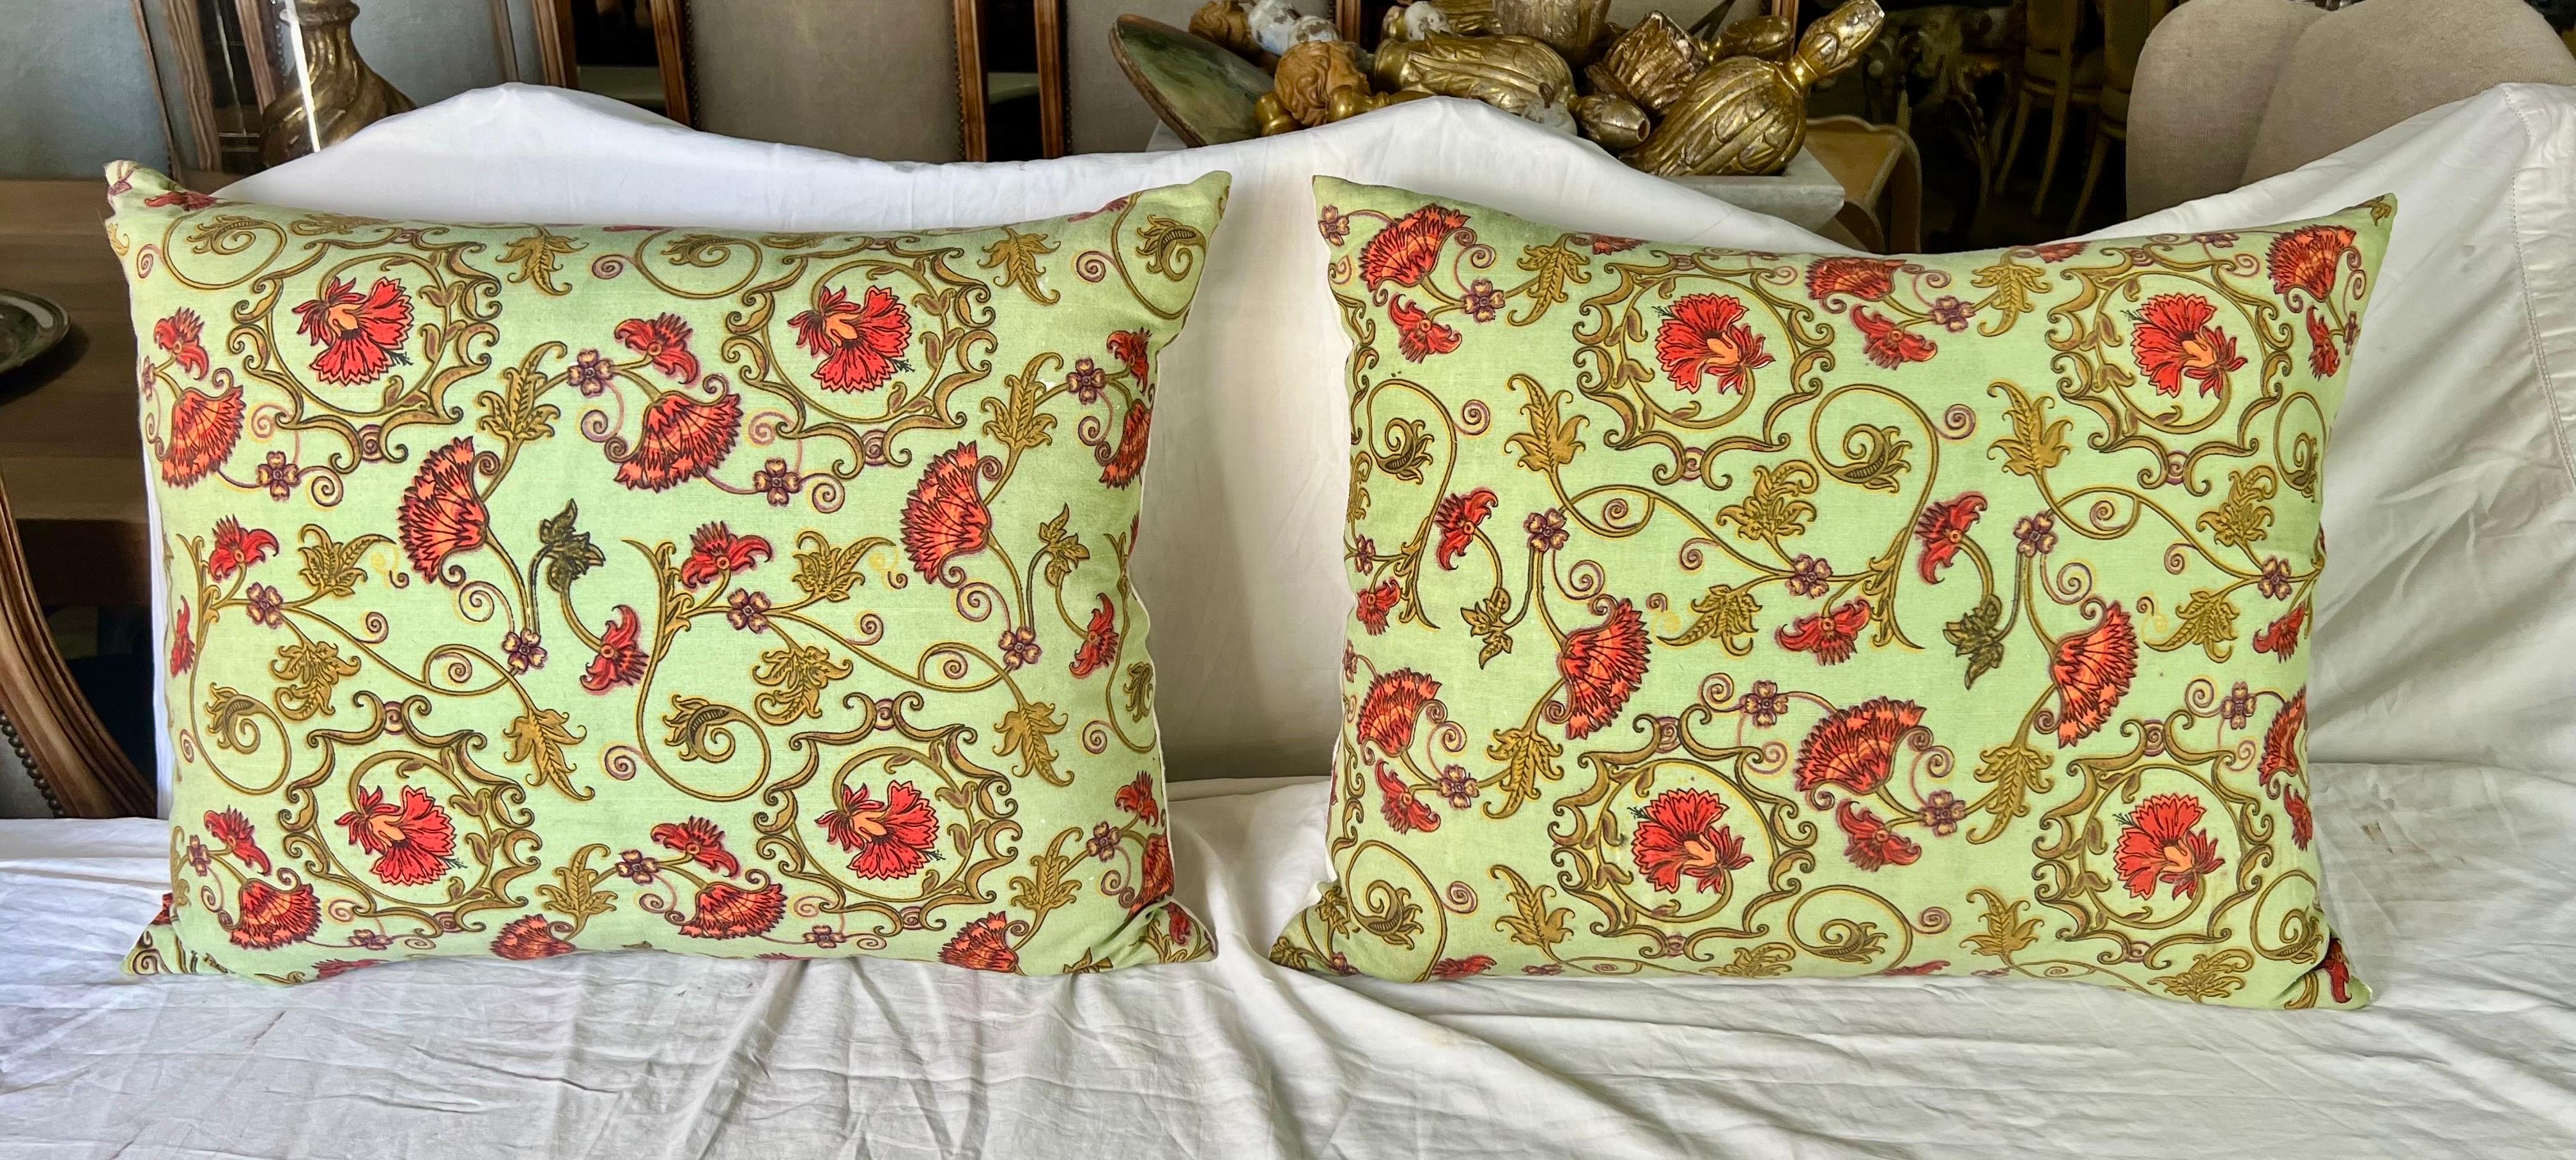 The pair of French Provincial custom pillows, showcasing swirling flowers in vibrant shades of green and orange, are paired with vintage white linen backs and down-filled inserts, adding a refreshing and classic touch to your decor.